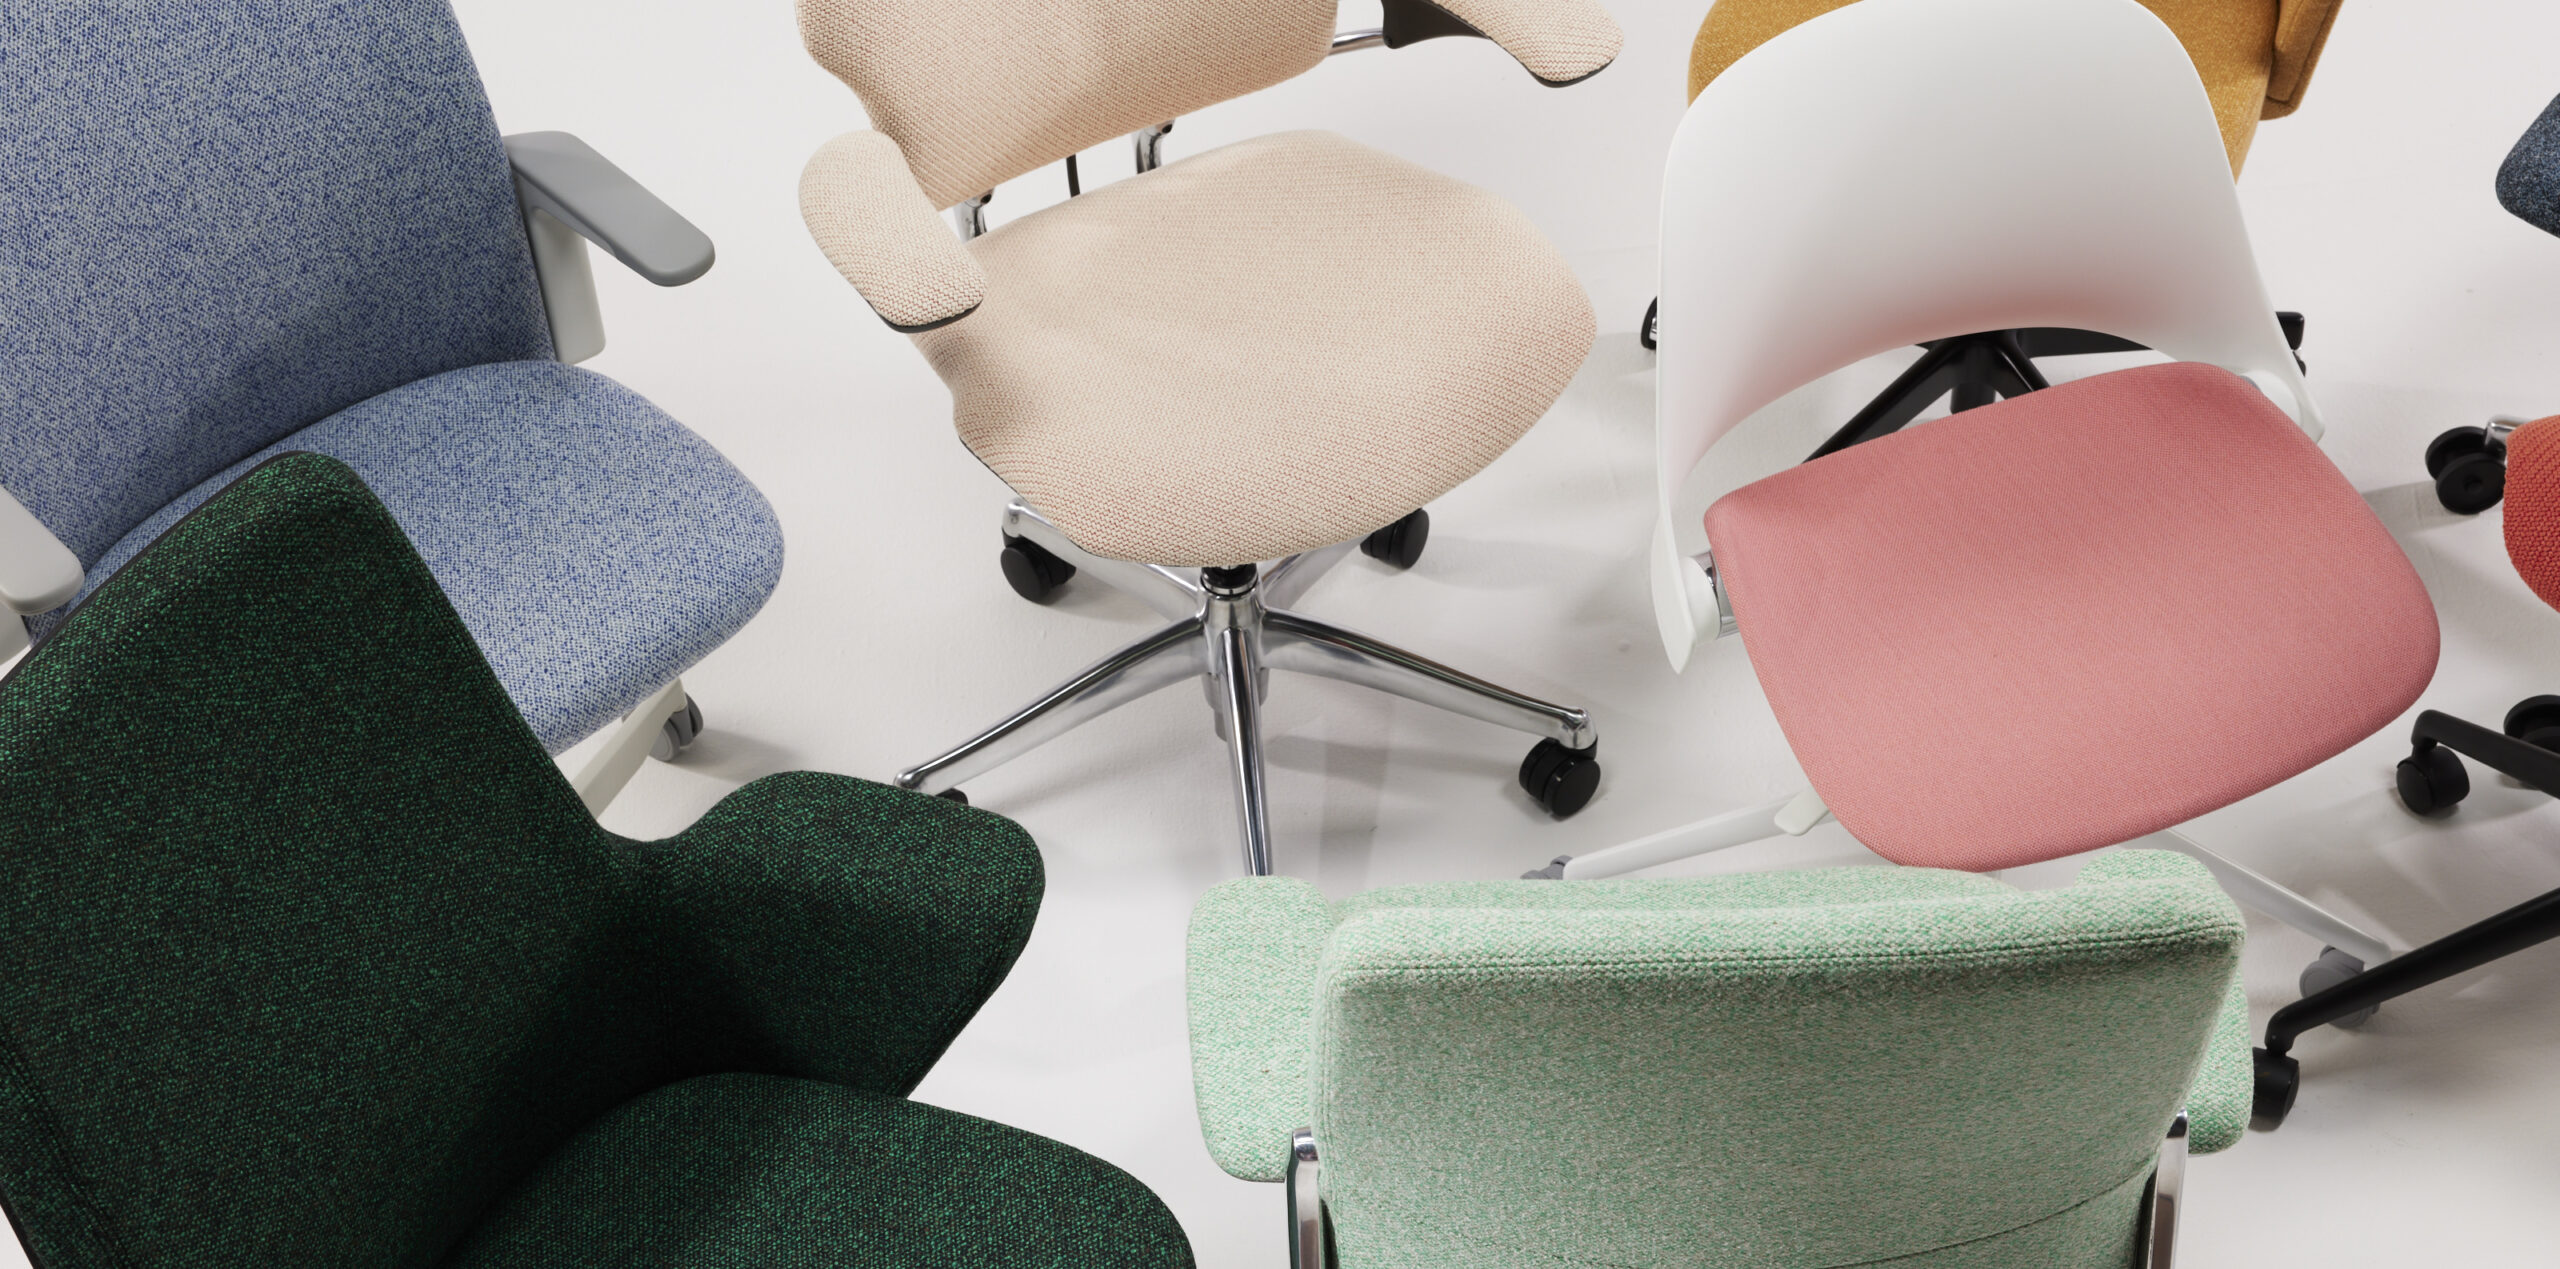 Humanscale showcases its global partnership with Kvadrat at the Stockholm Furniture Fair